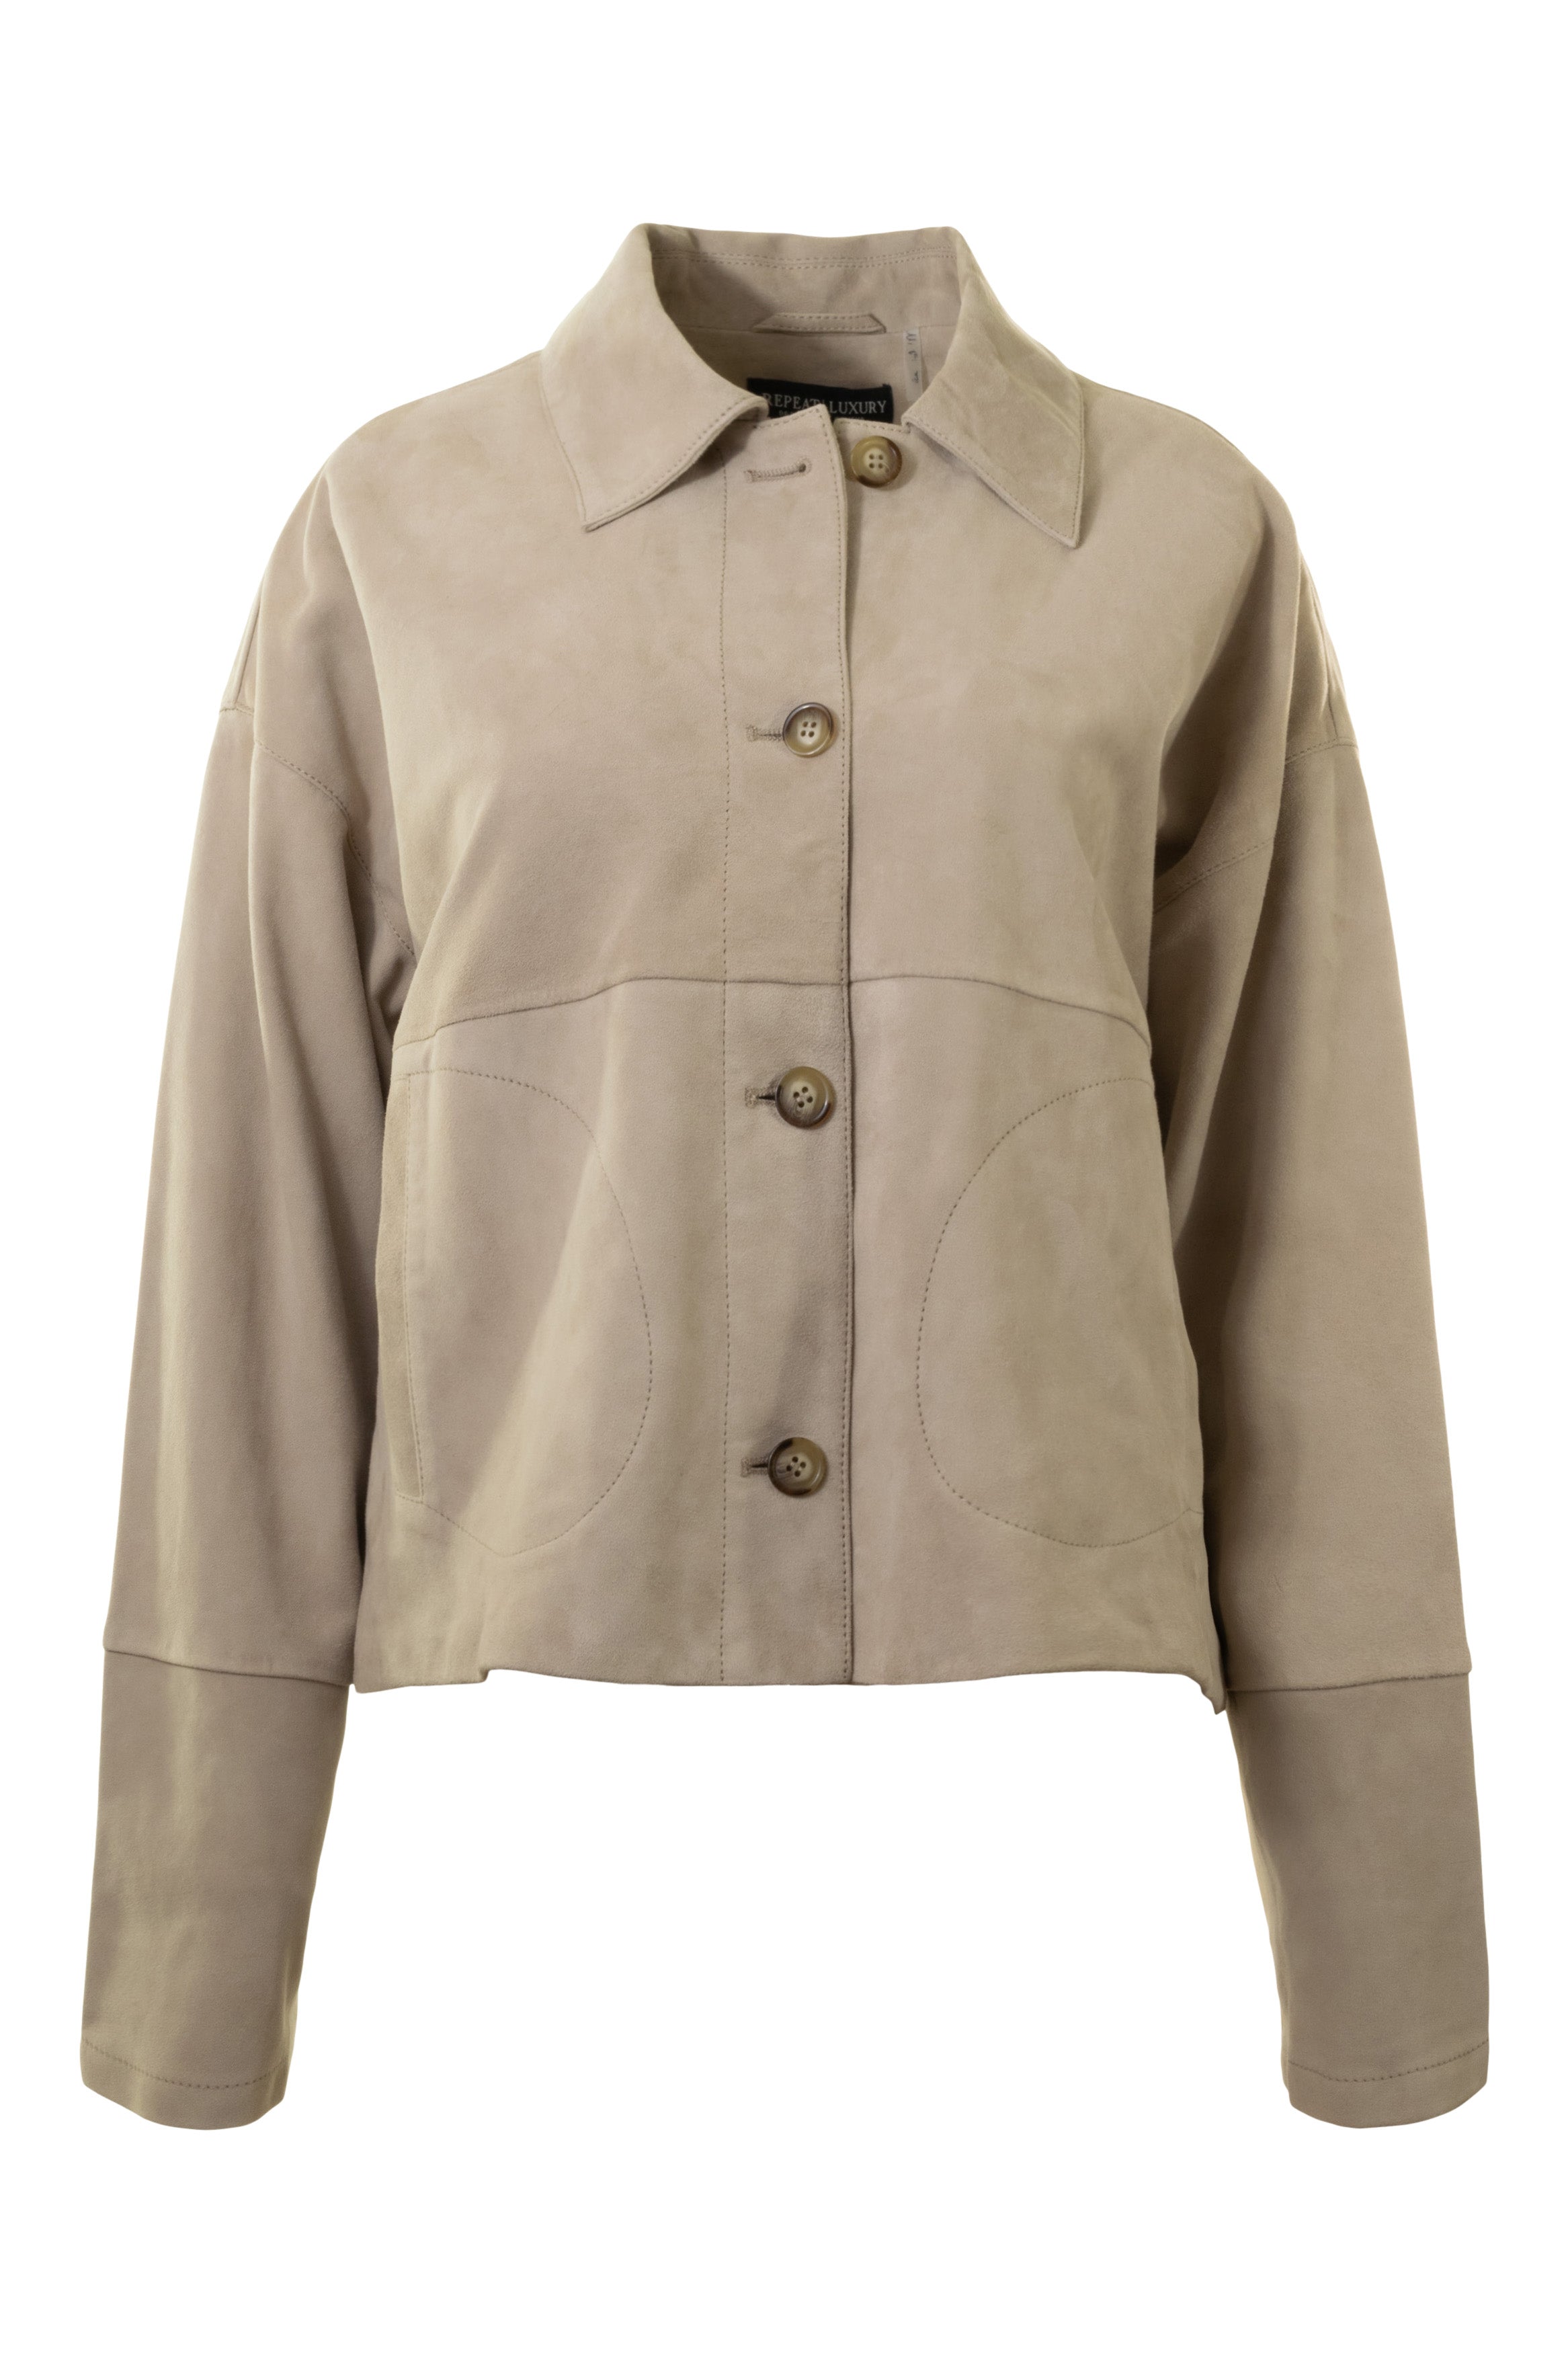 Repeat Cashmere Buttoned Suede Jacket With Shirt Collar in Nougat